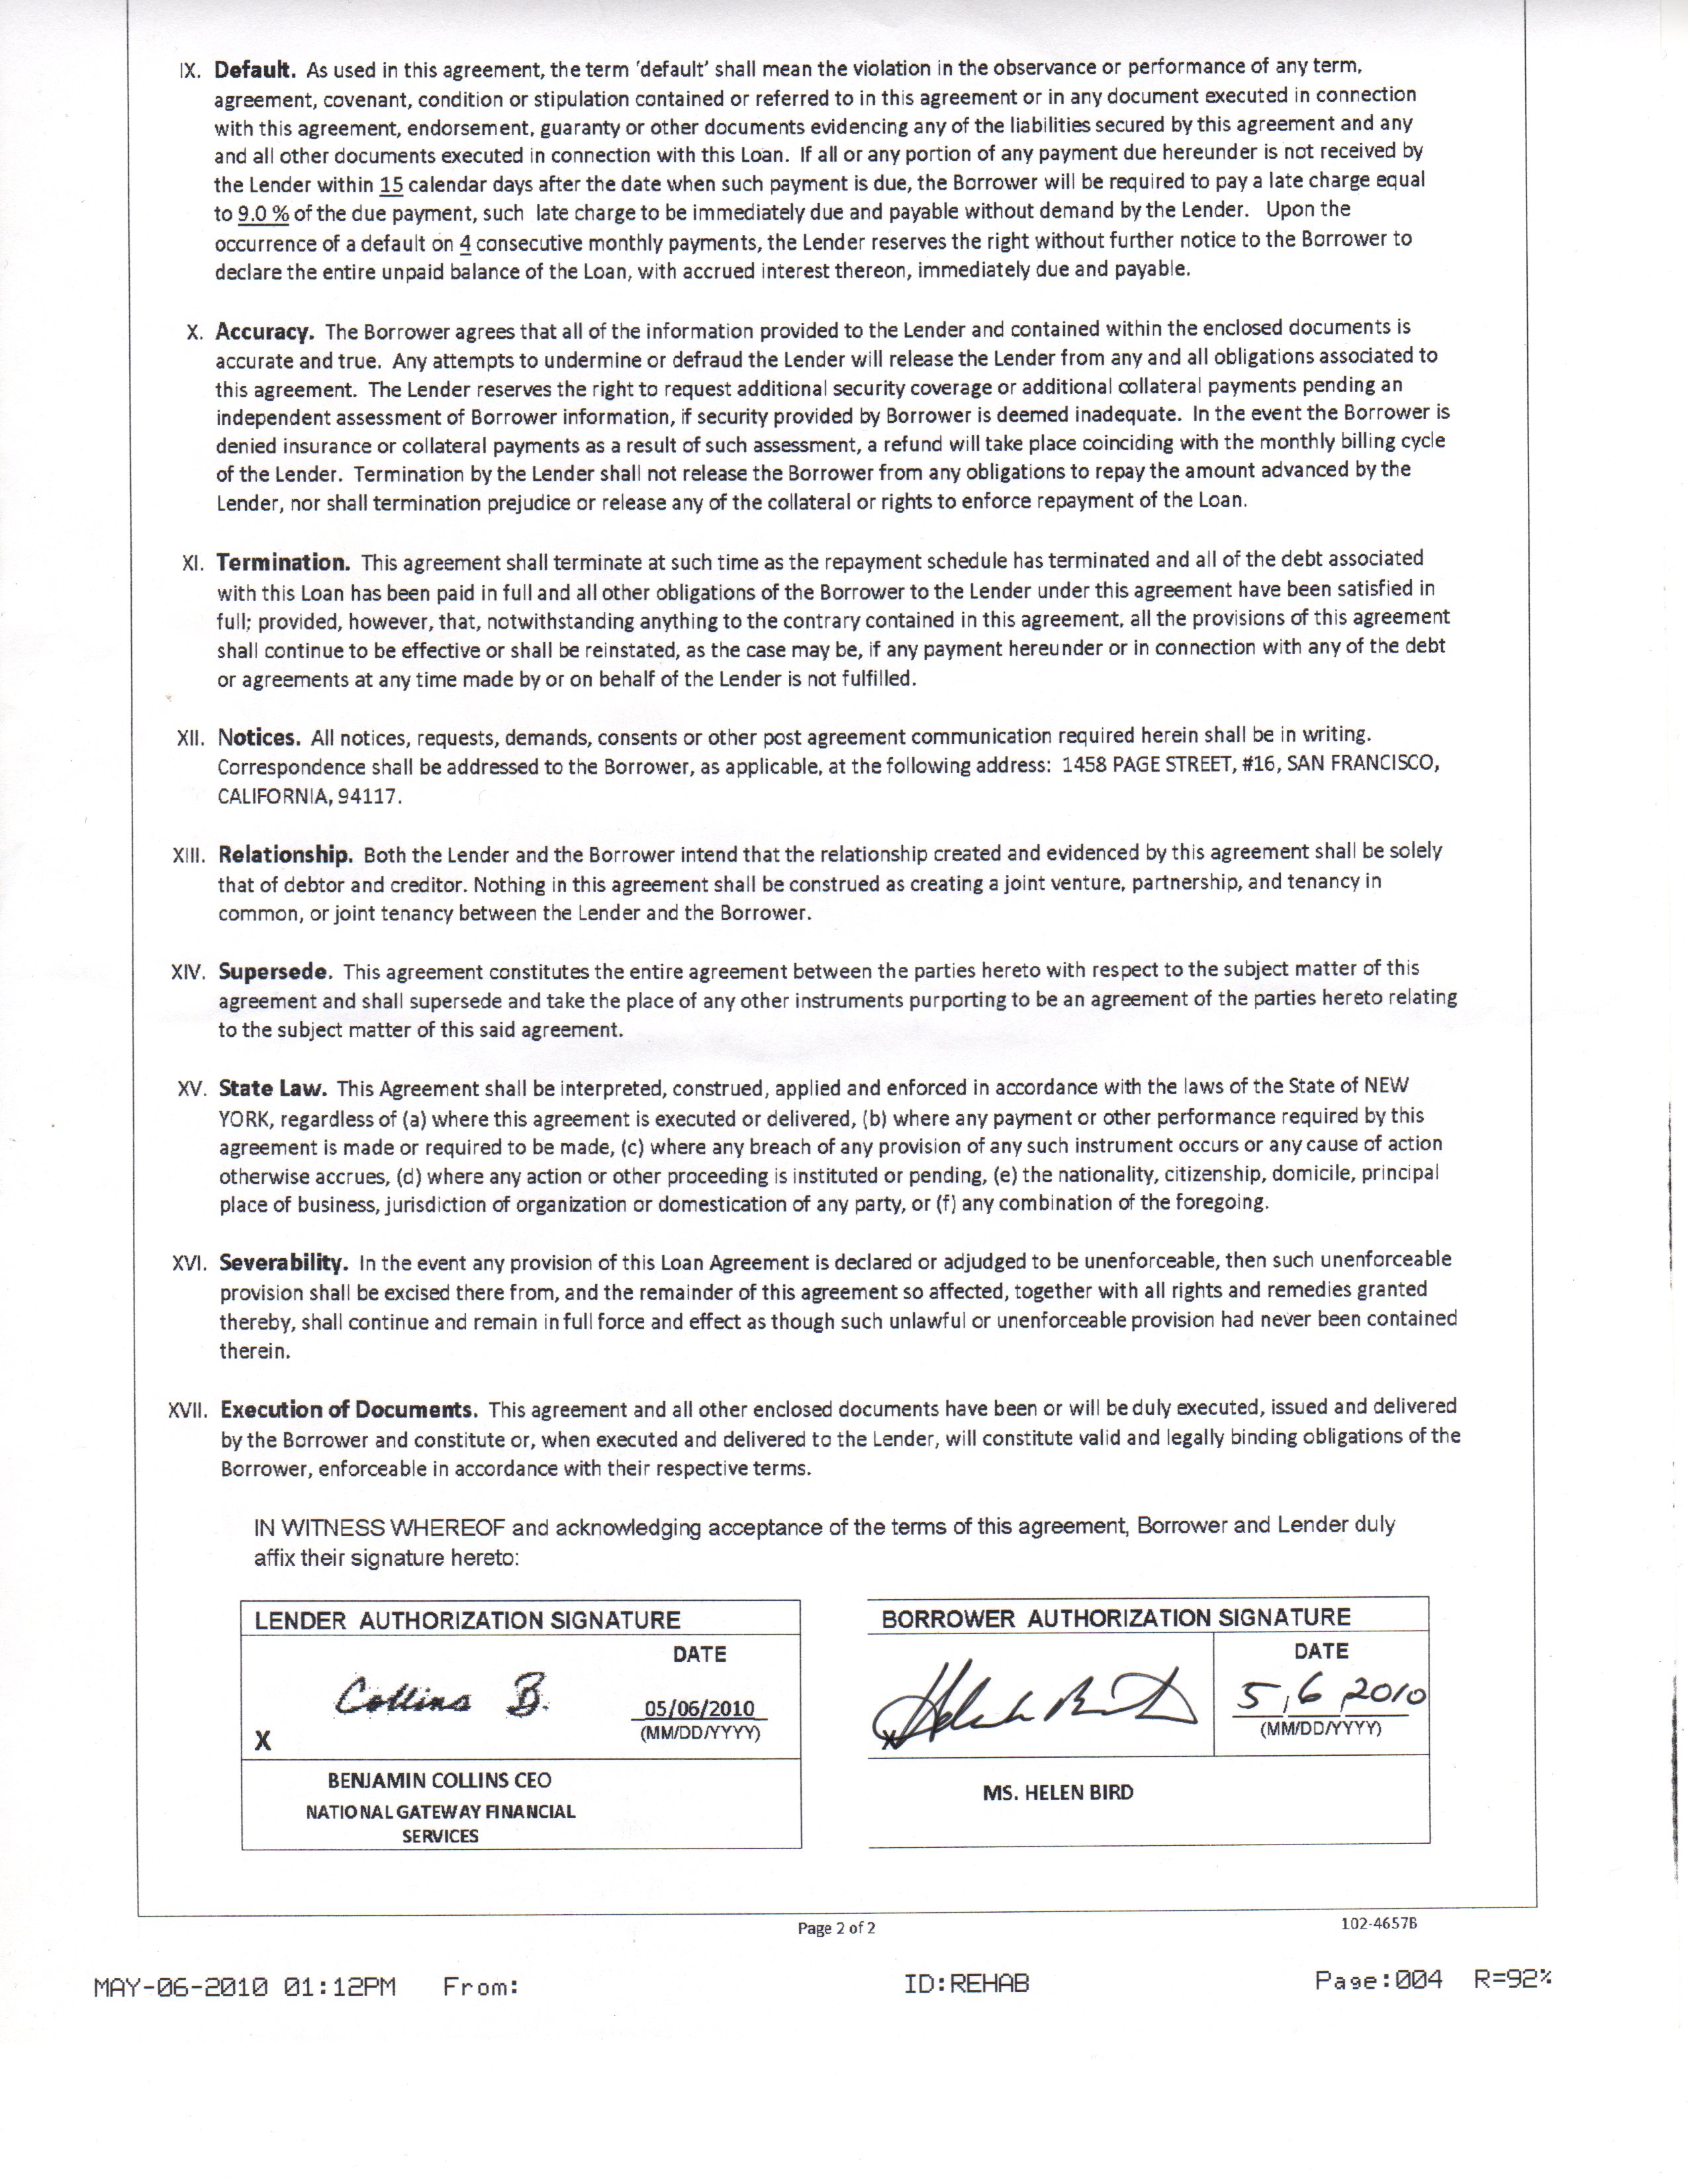 loan document with ceo signature